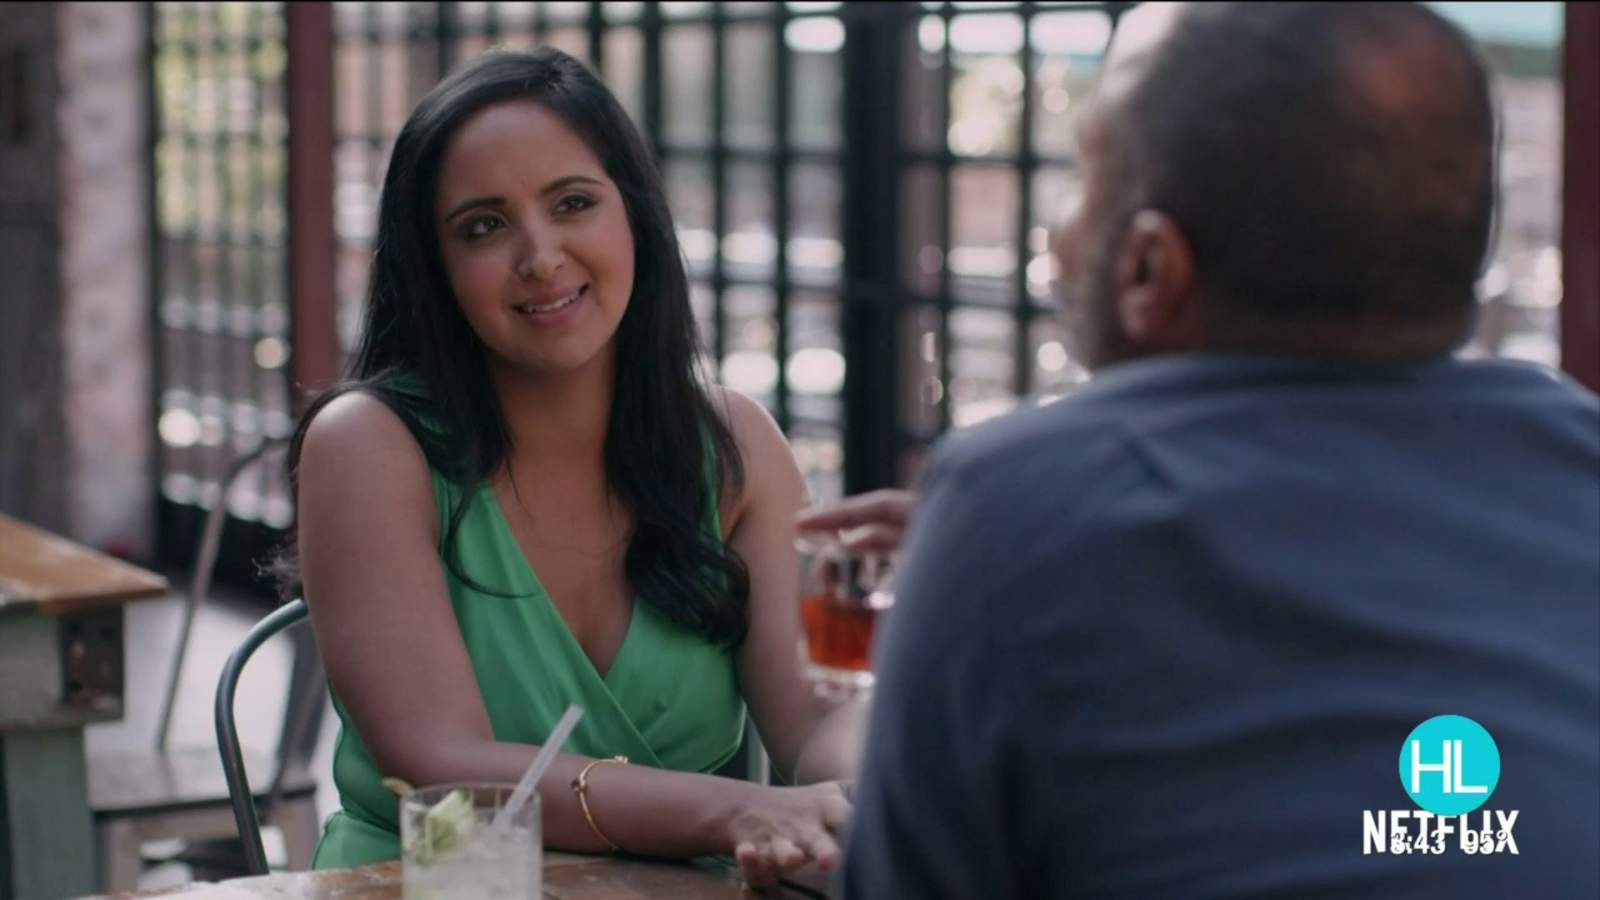 This Houston lawyer is the star of Netflix’s hit show ‘Indian Matchmaking’